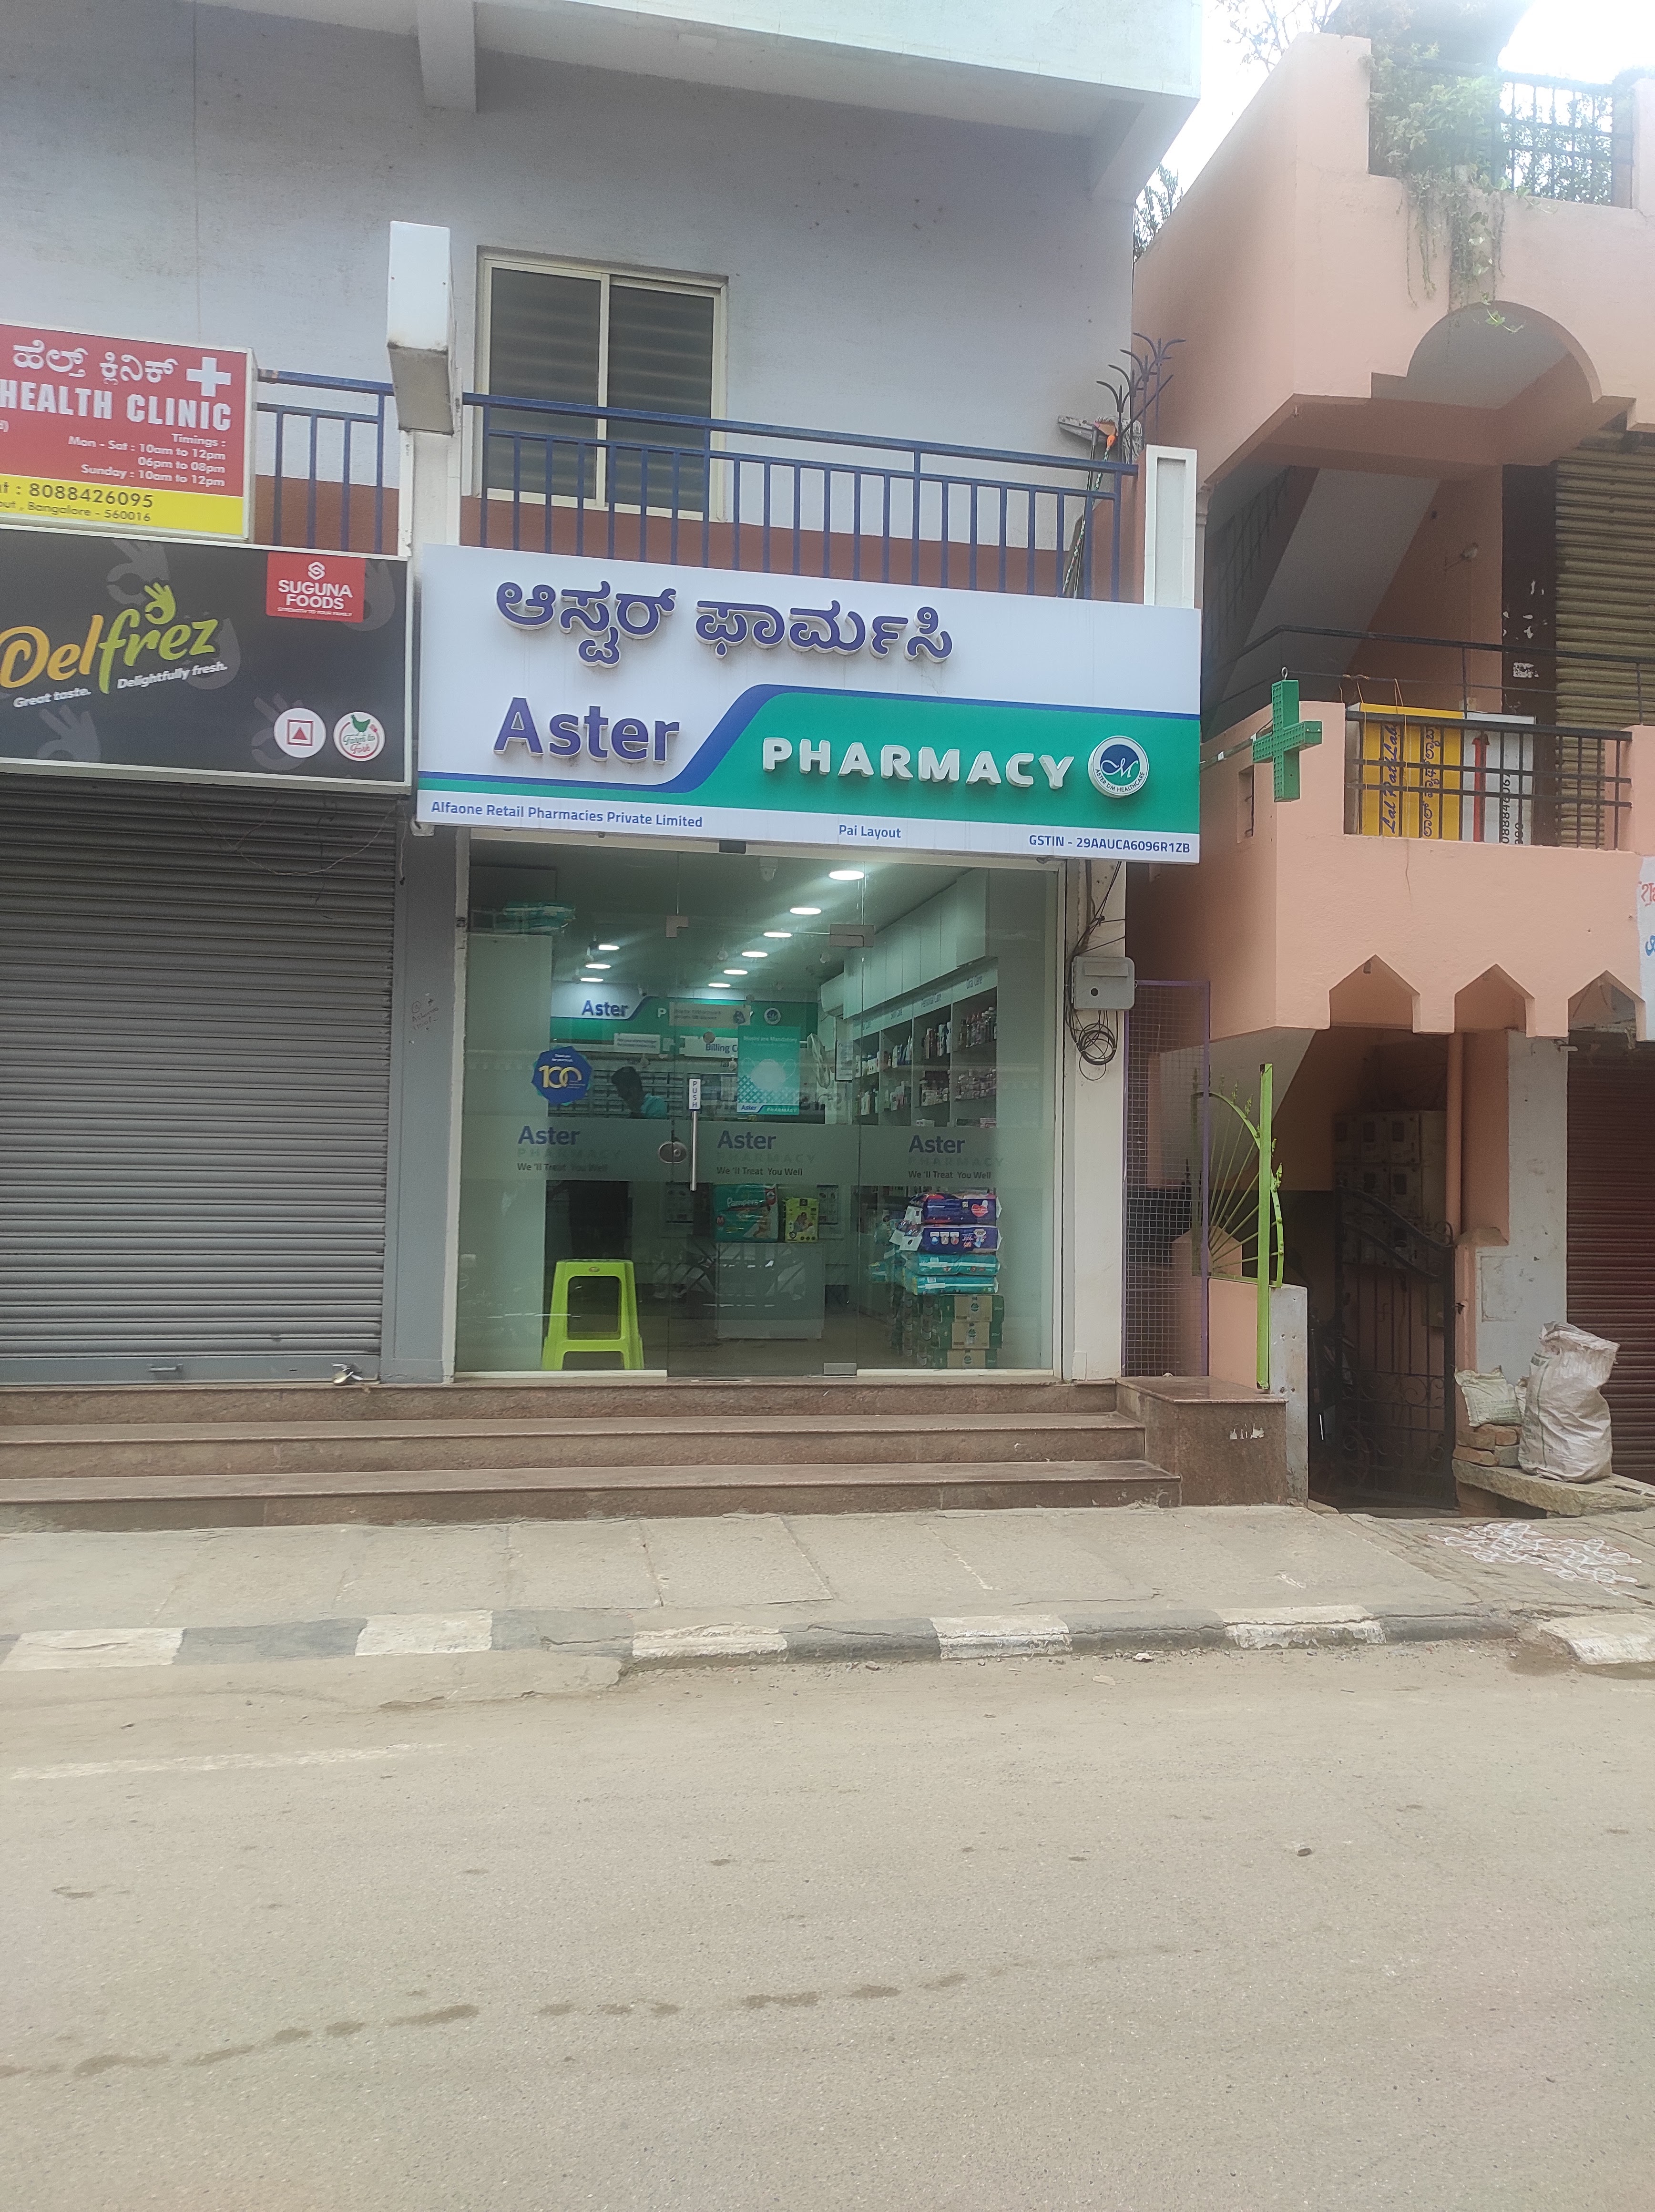 Aster Pharmacy in Pai Layout, Bangalore